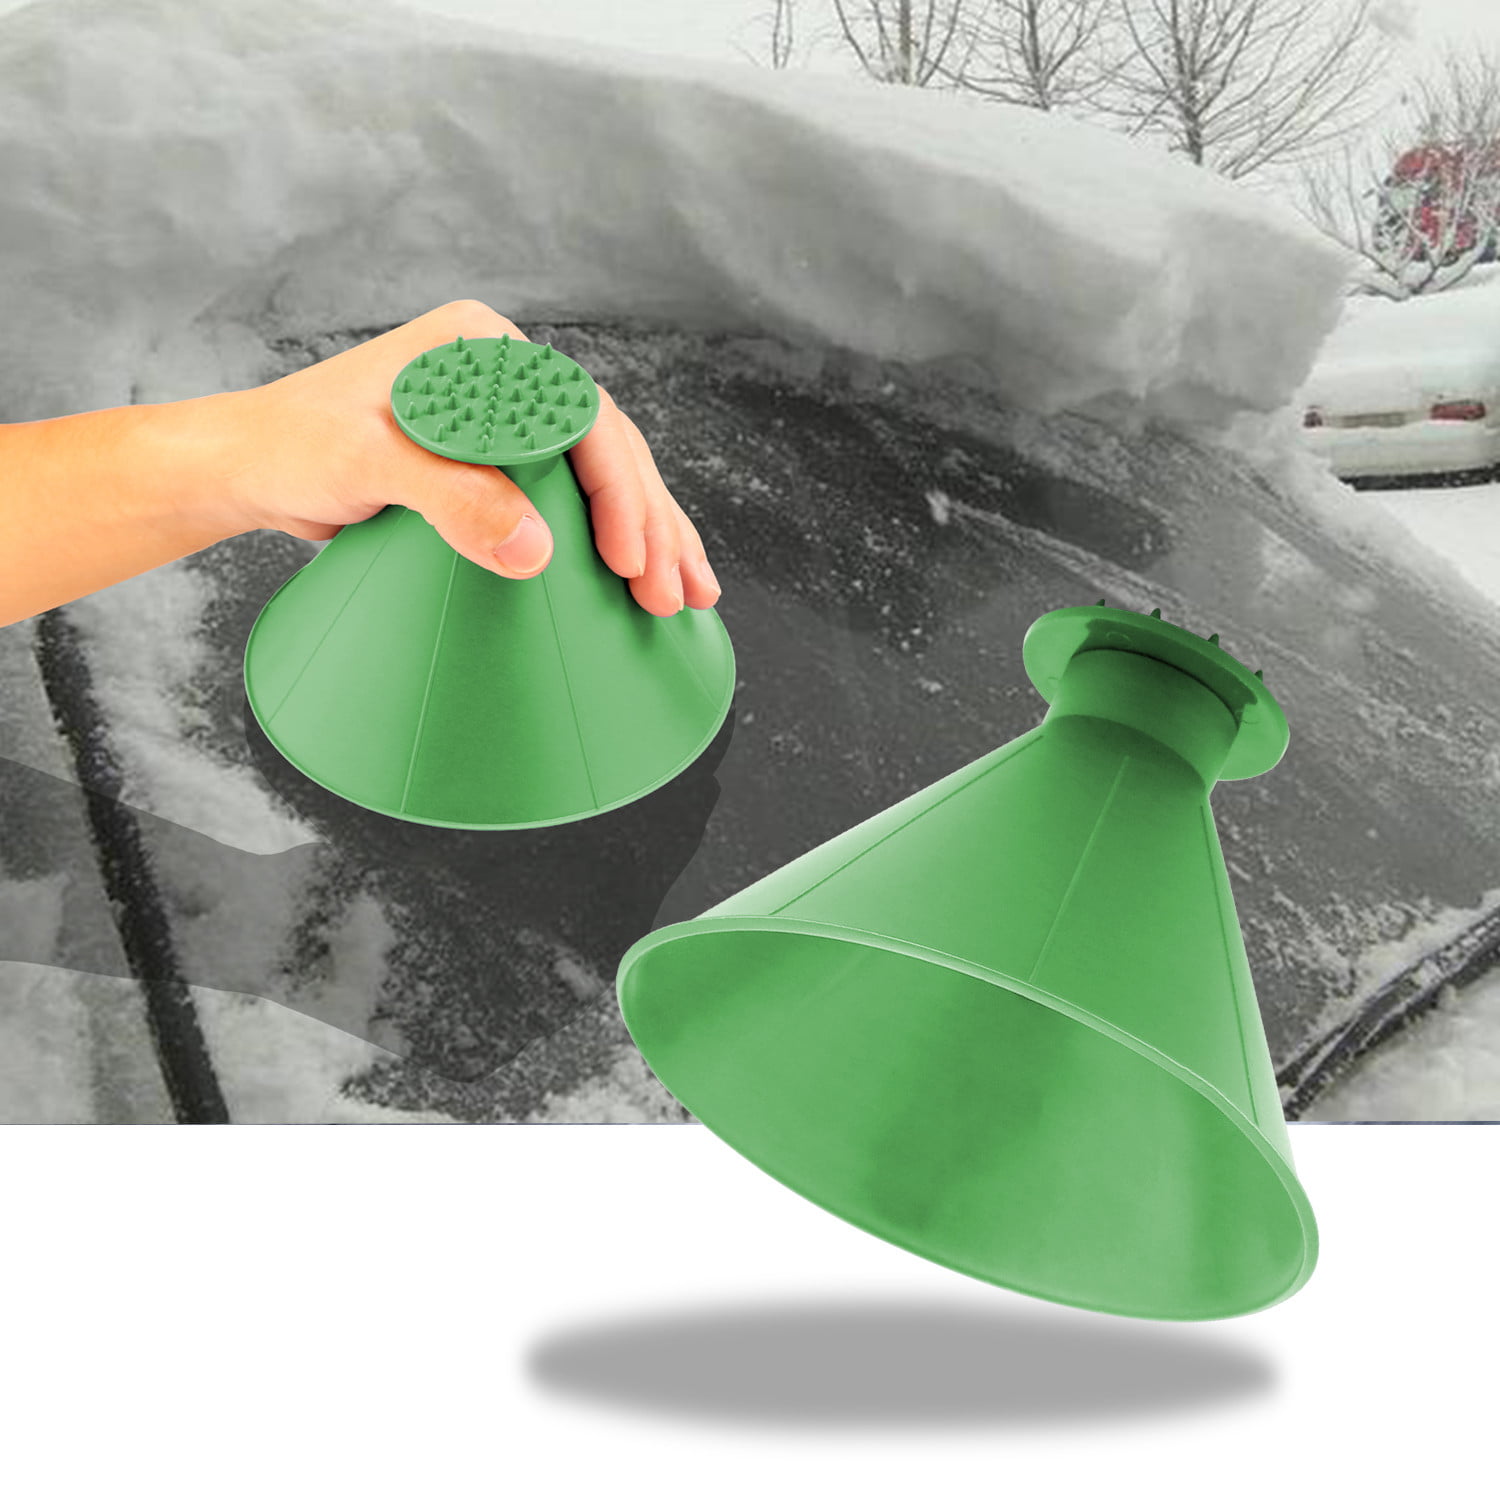 Magical Ice Scrapers Snow Shovel Gardening Trowels Car Round Windshield Snow Scraper Funnel Cone-Shaped Snow Removal Shovel Tool 